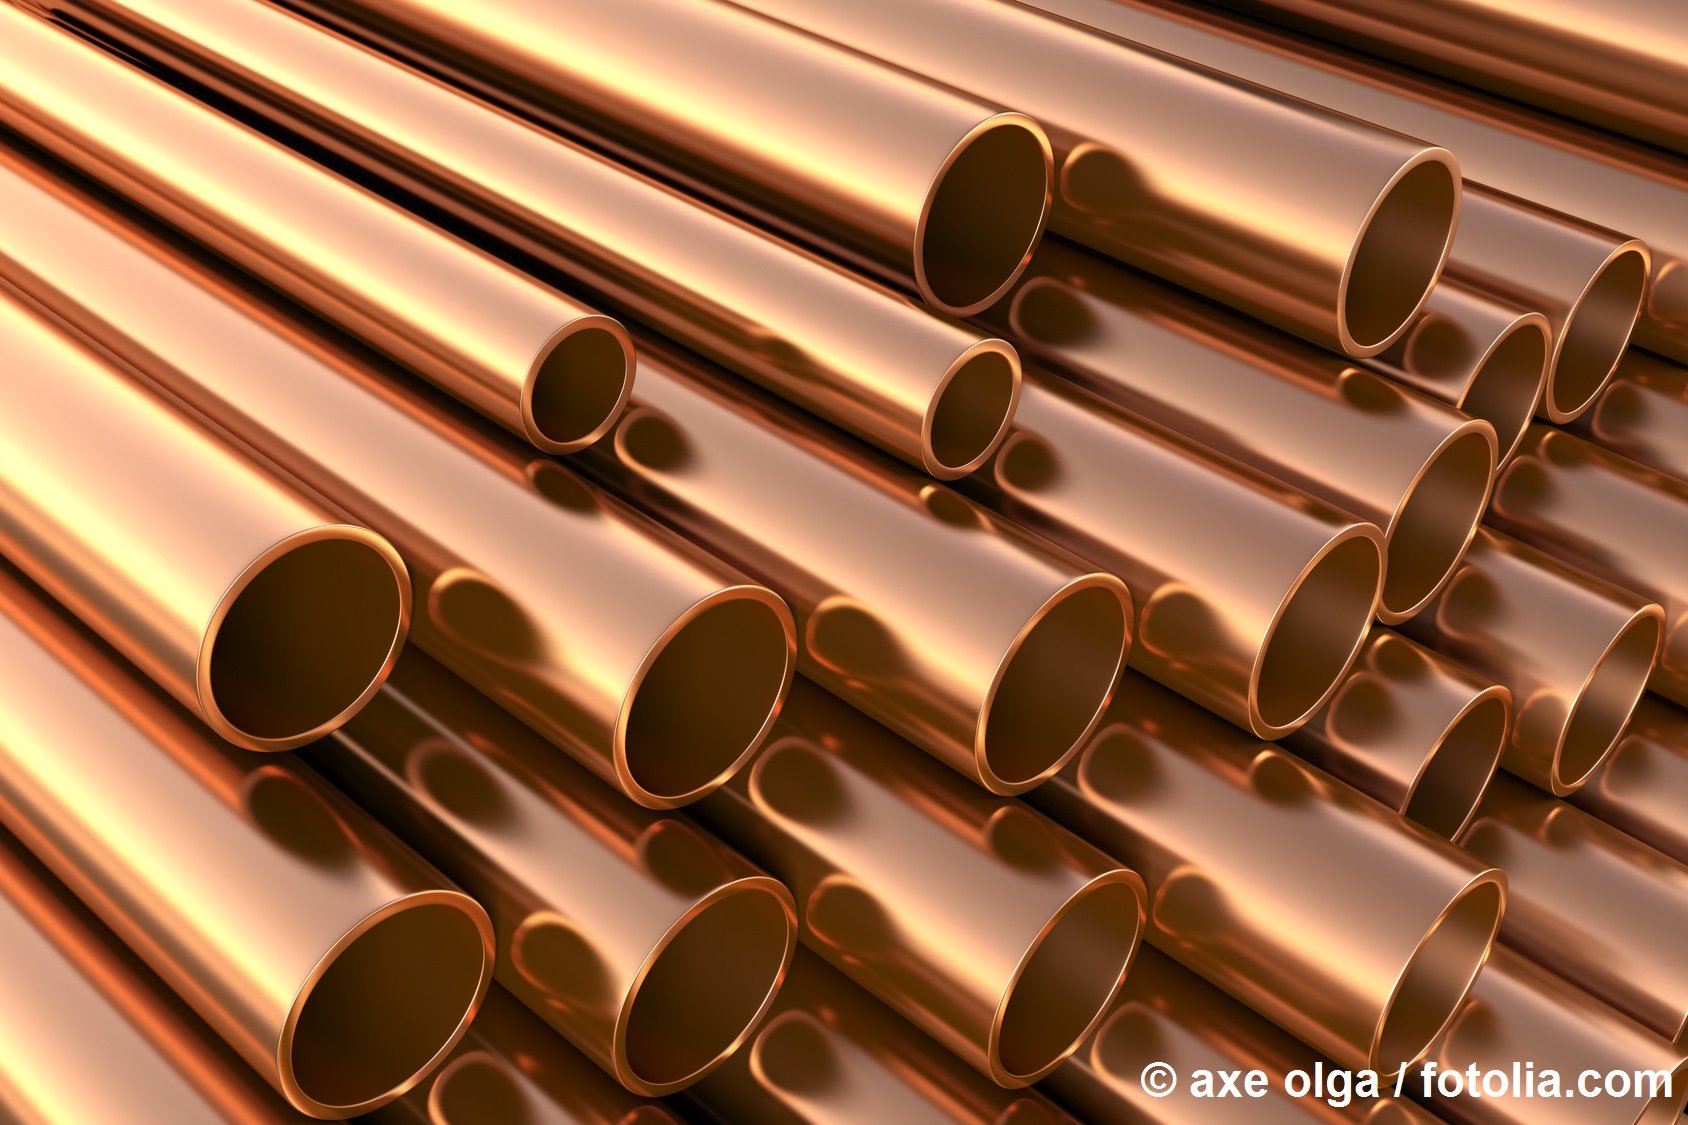 staple of copper pipes as application example for copper